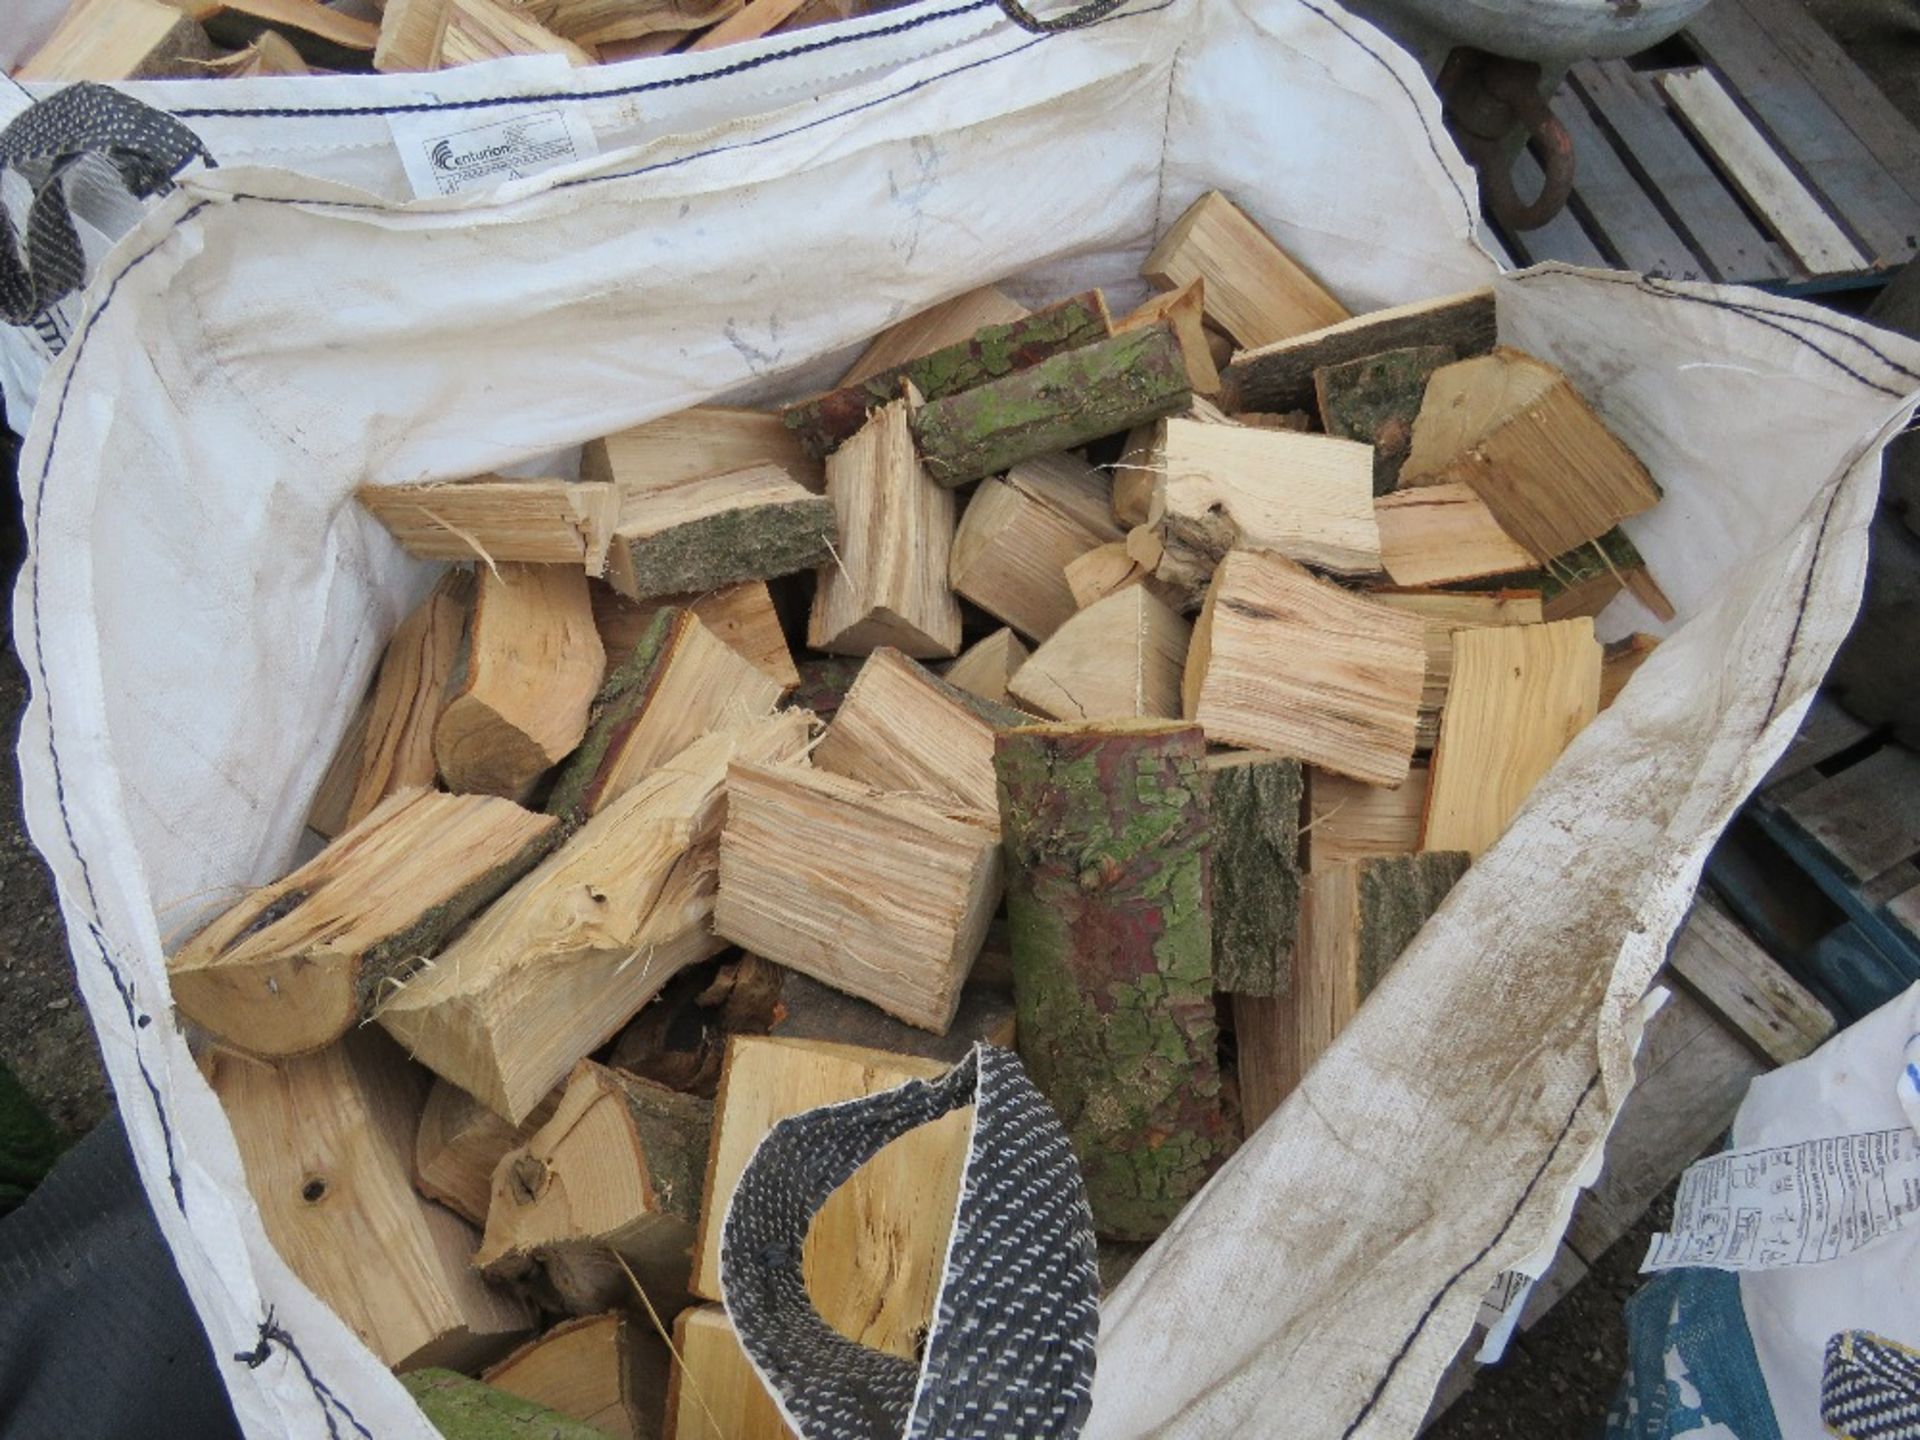 2 X BULK BAGS OF HARDWOOD FIREWOOD LOGS, BELIEVED TO CONTAIN ASH AND ELM. THIS LOT IS SOLD UNDER - Image 2 of 3